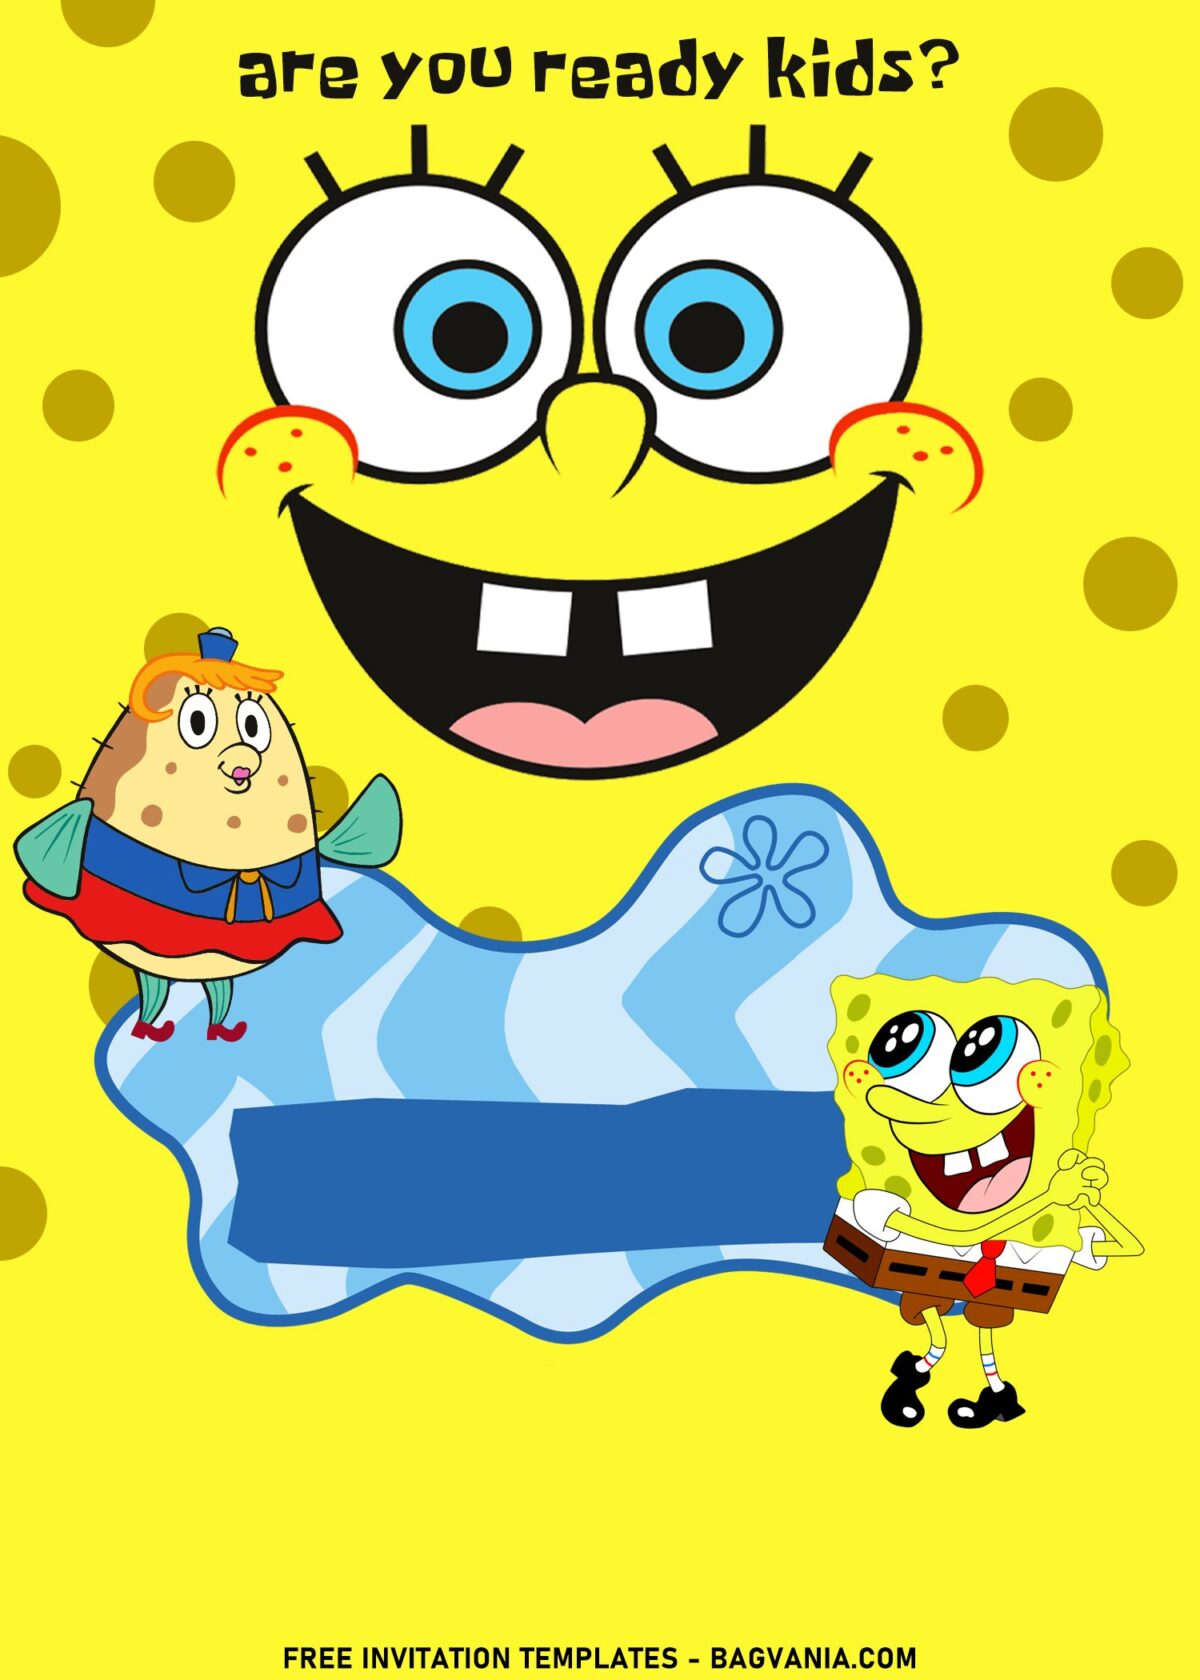 11+ Bright And Colorful SpongeBob Birthday Invitation Templates with Mrs. Puff and SpongeBob